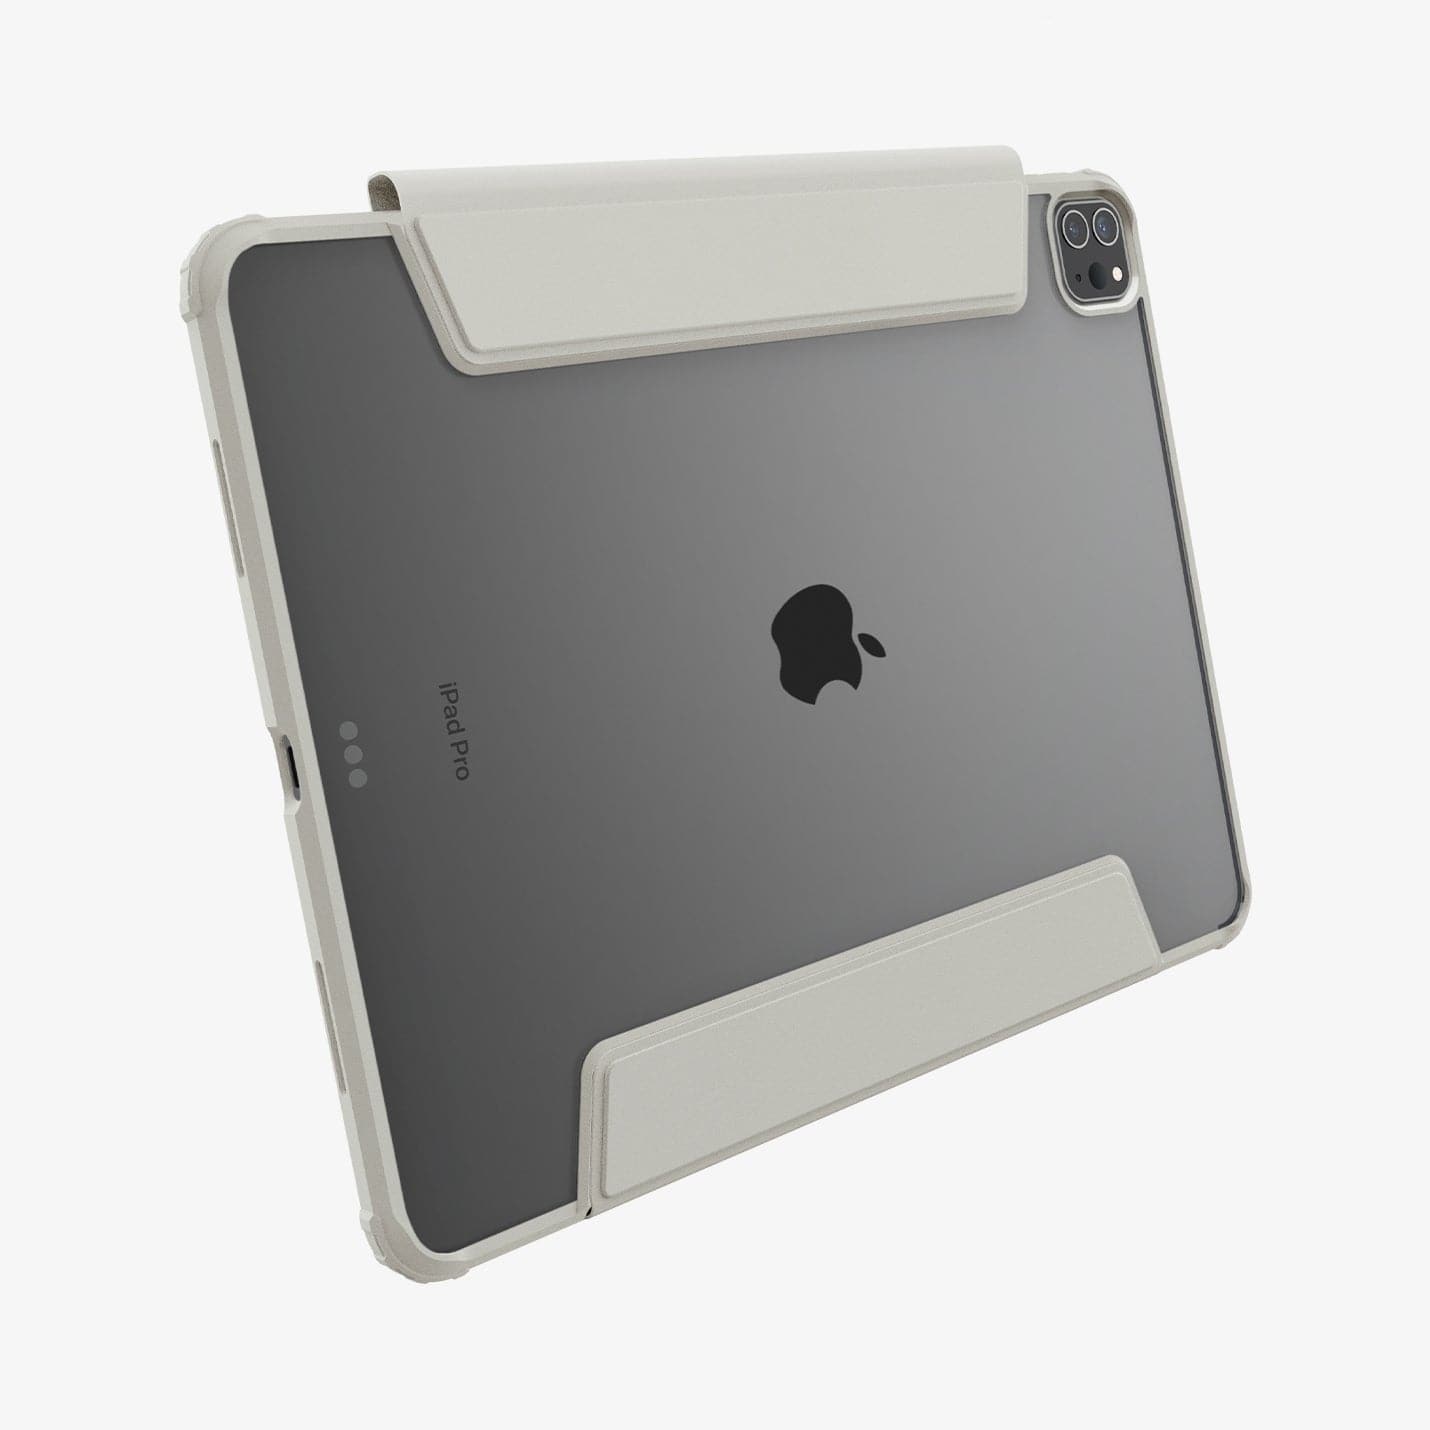  ACS06076 - iPad Pro 12.9" Case Air Skin Pro in gray showing the back and bottom